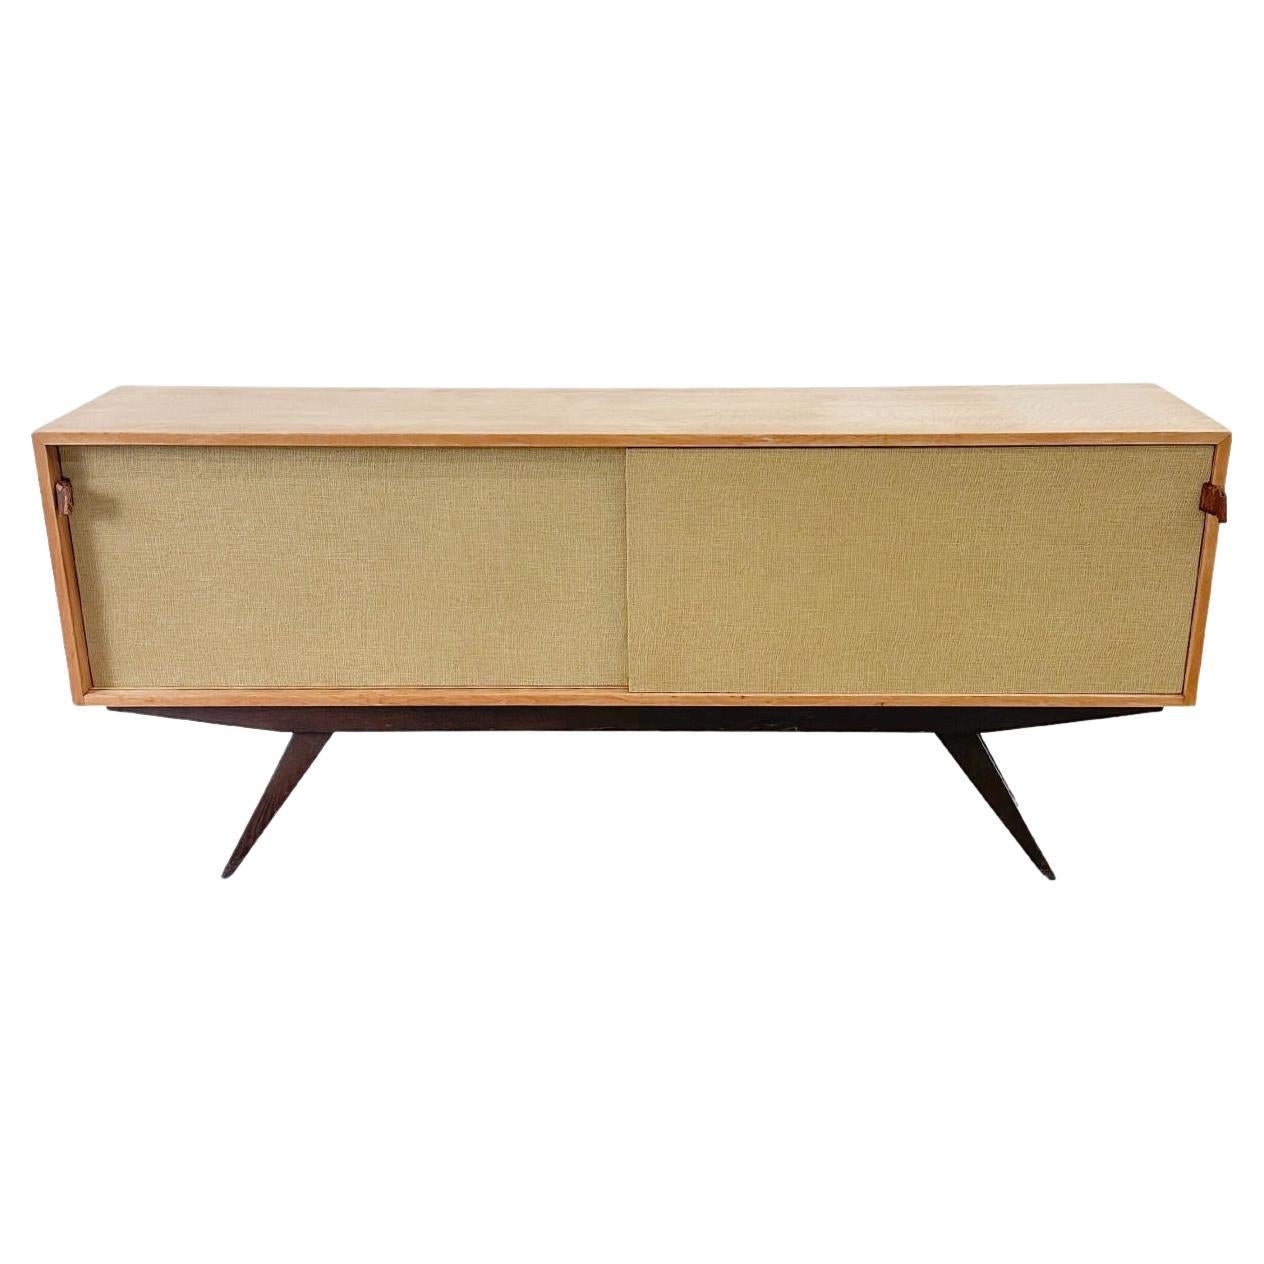 Early Florence Knoll Model 122 Credenza